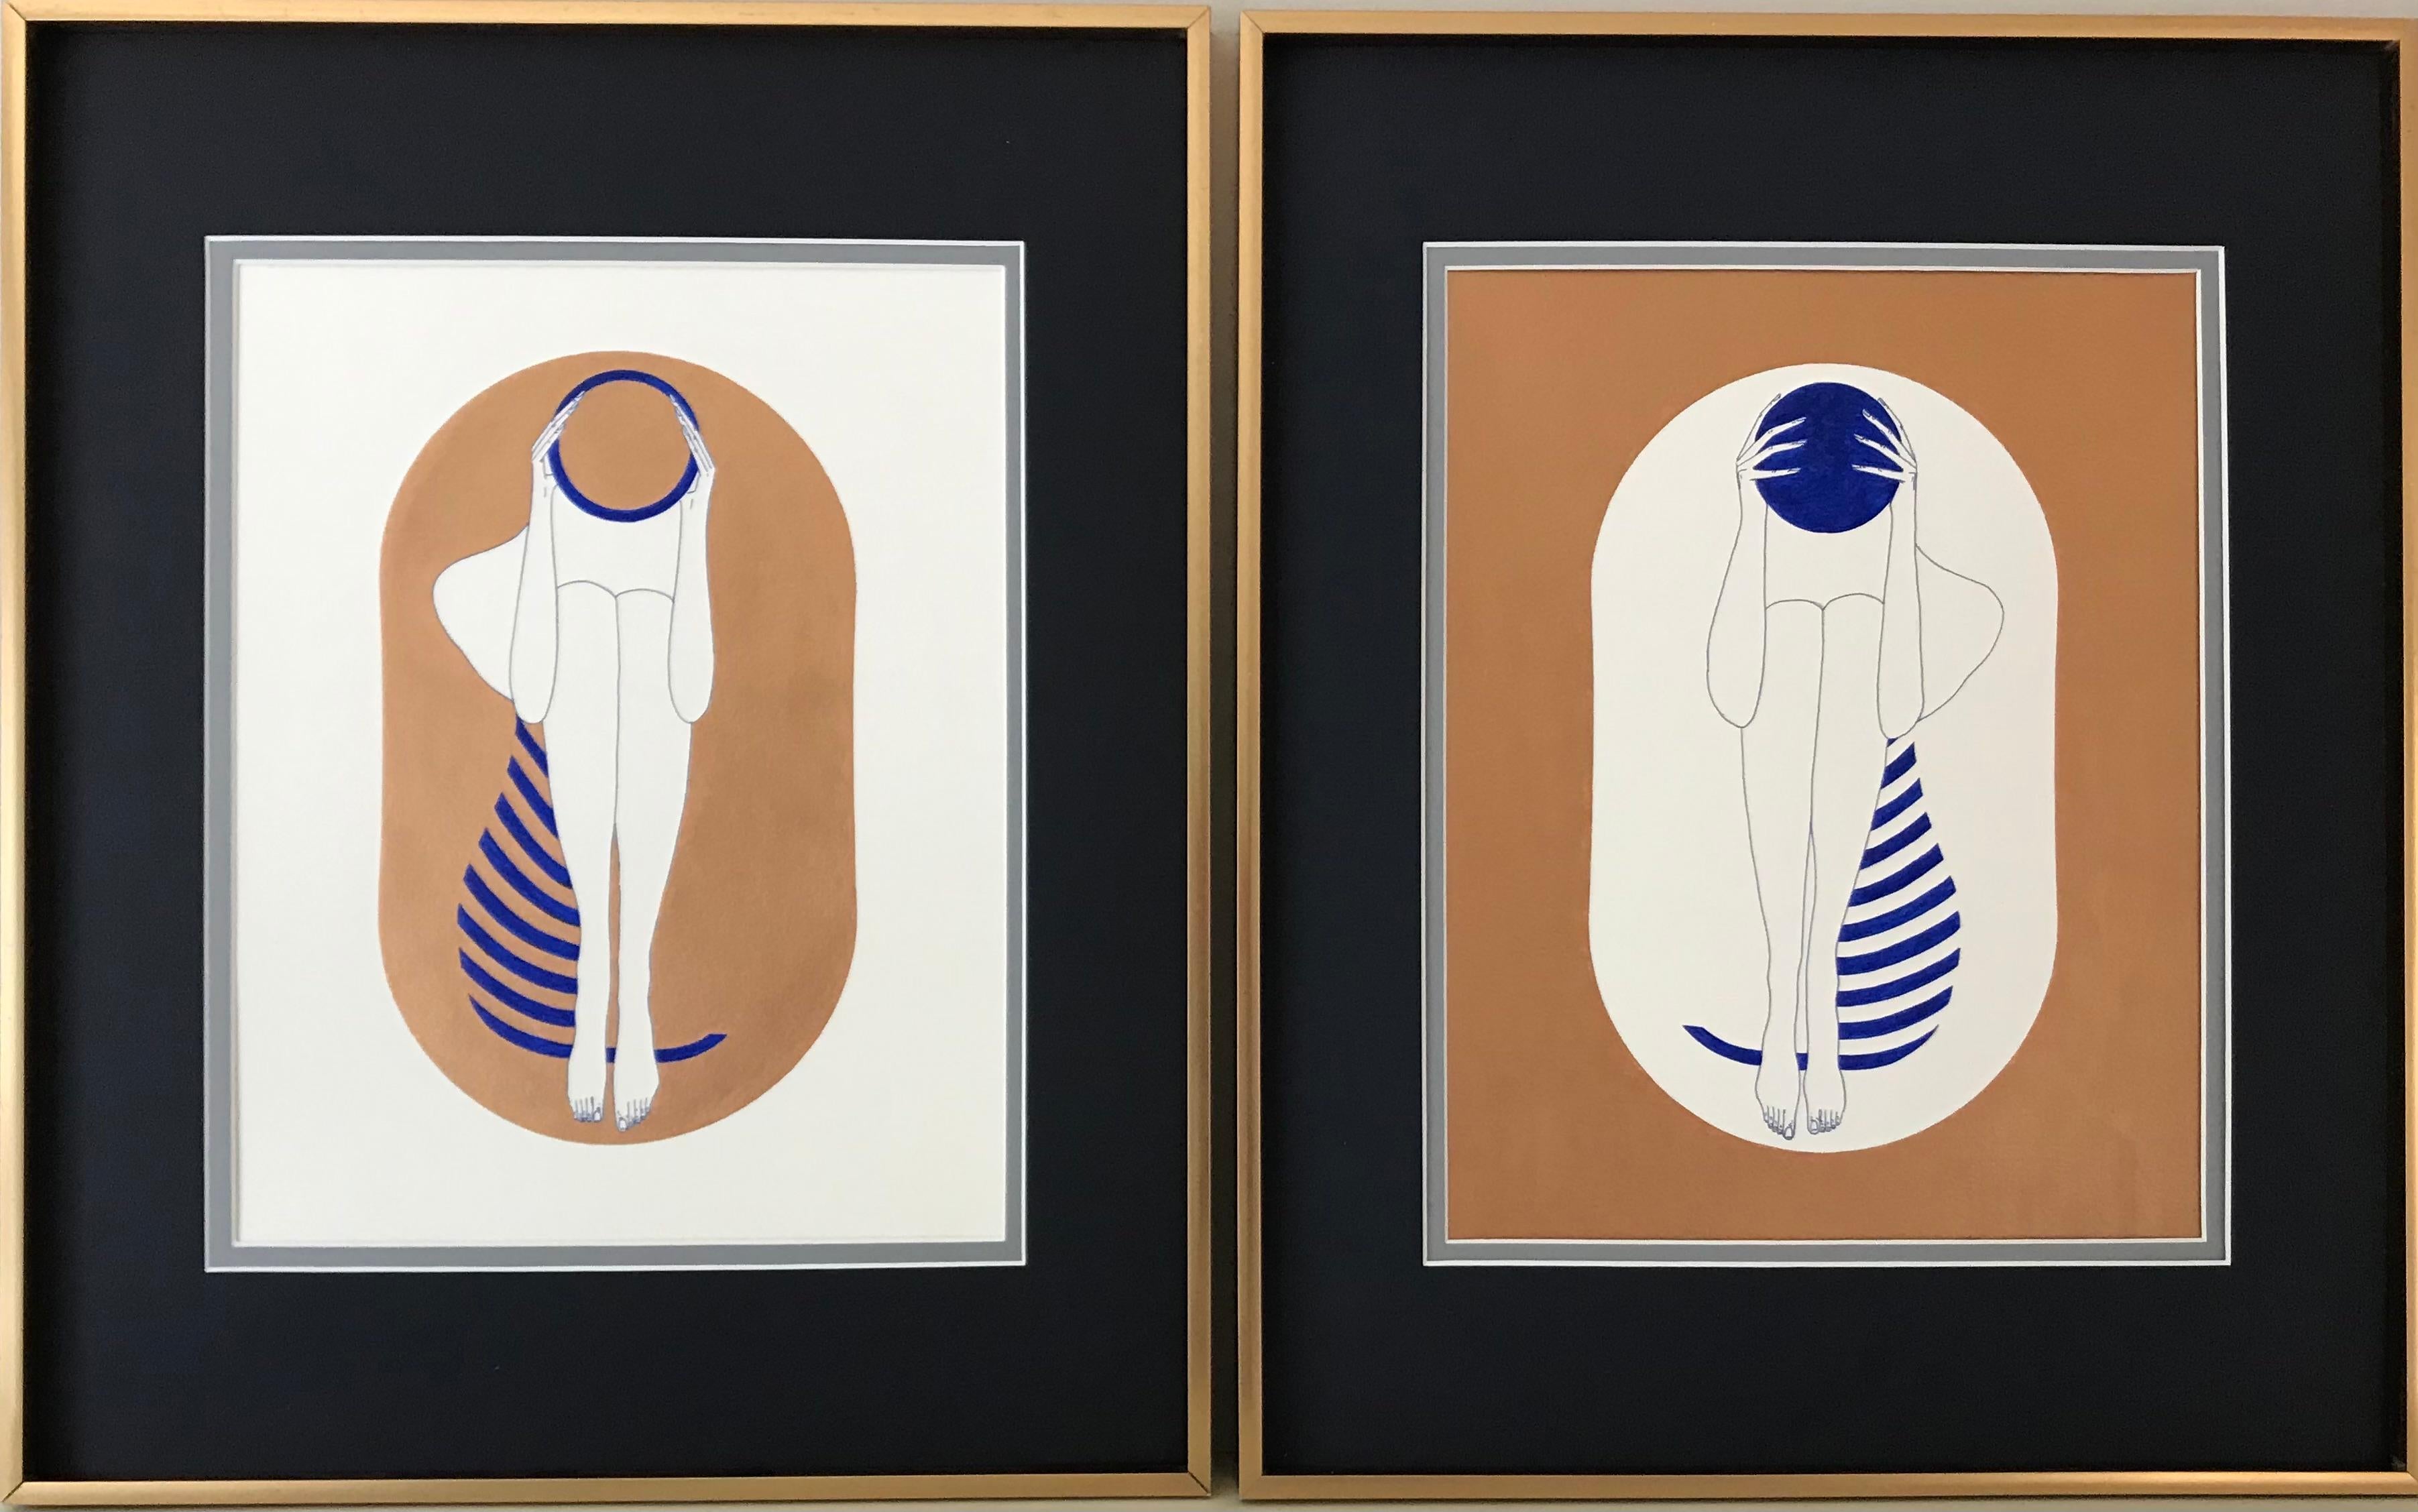 Bronze and white capsules - line drawing figure with ultramarine disk, stripes